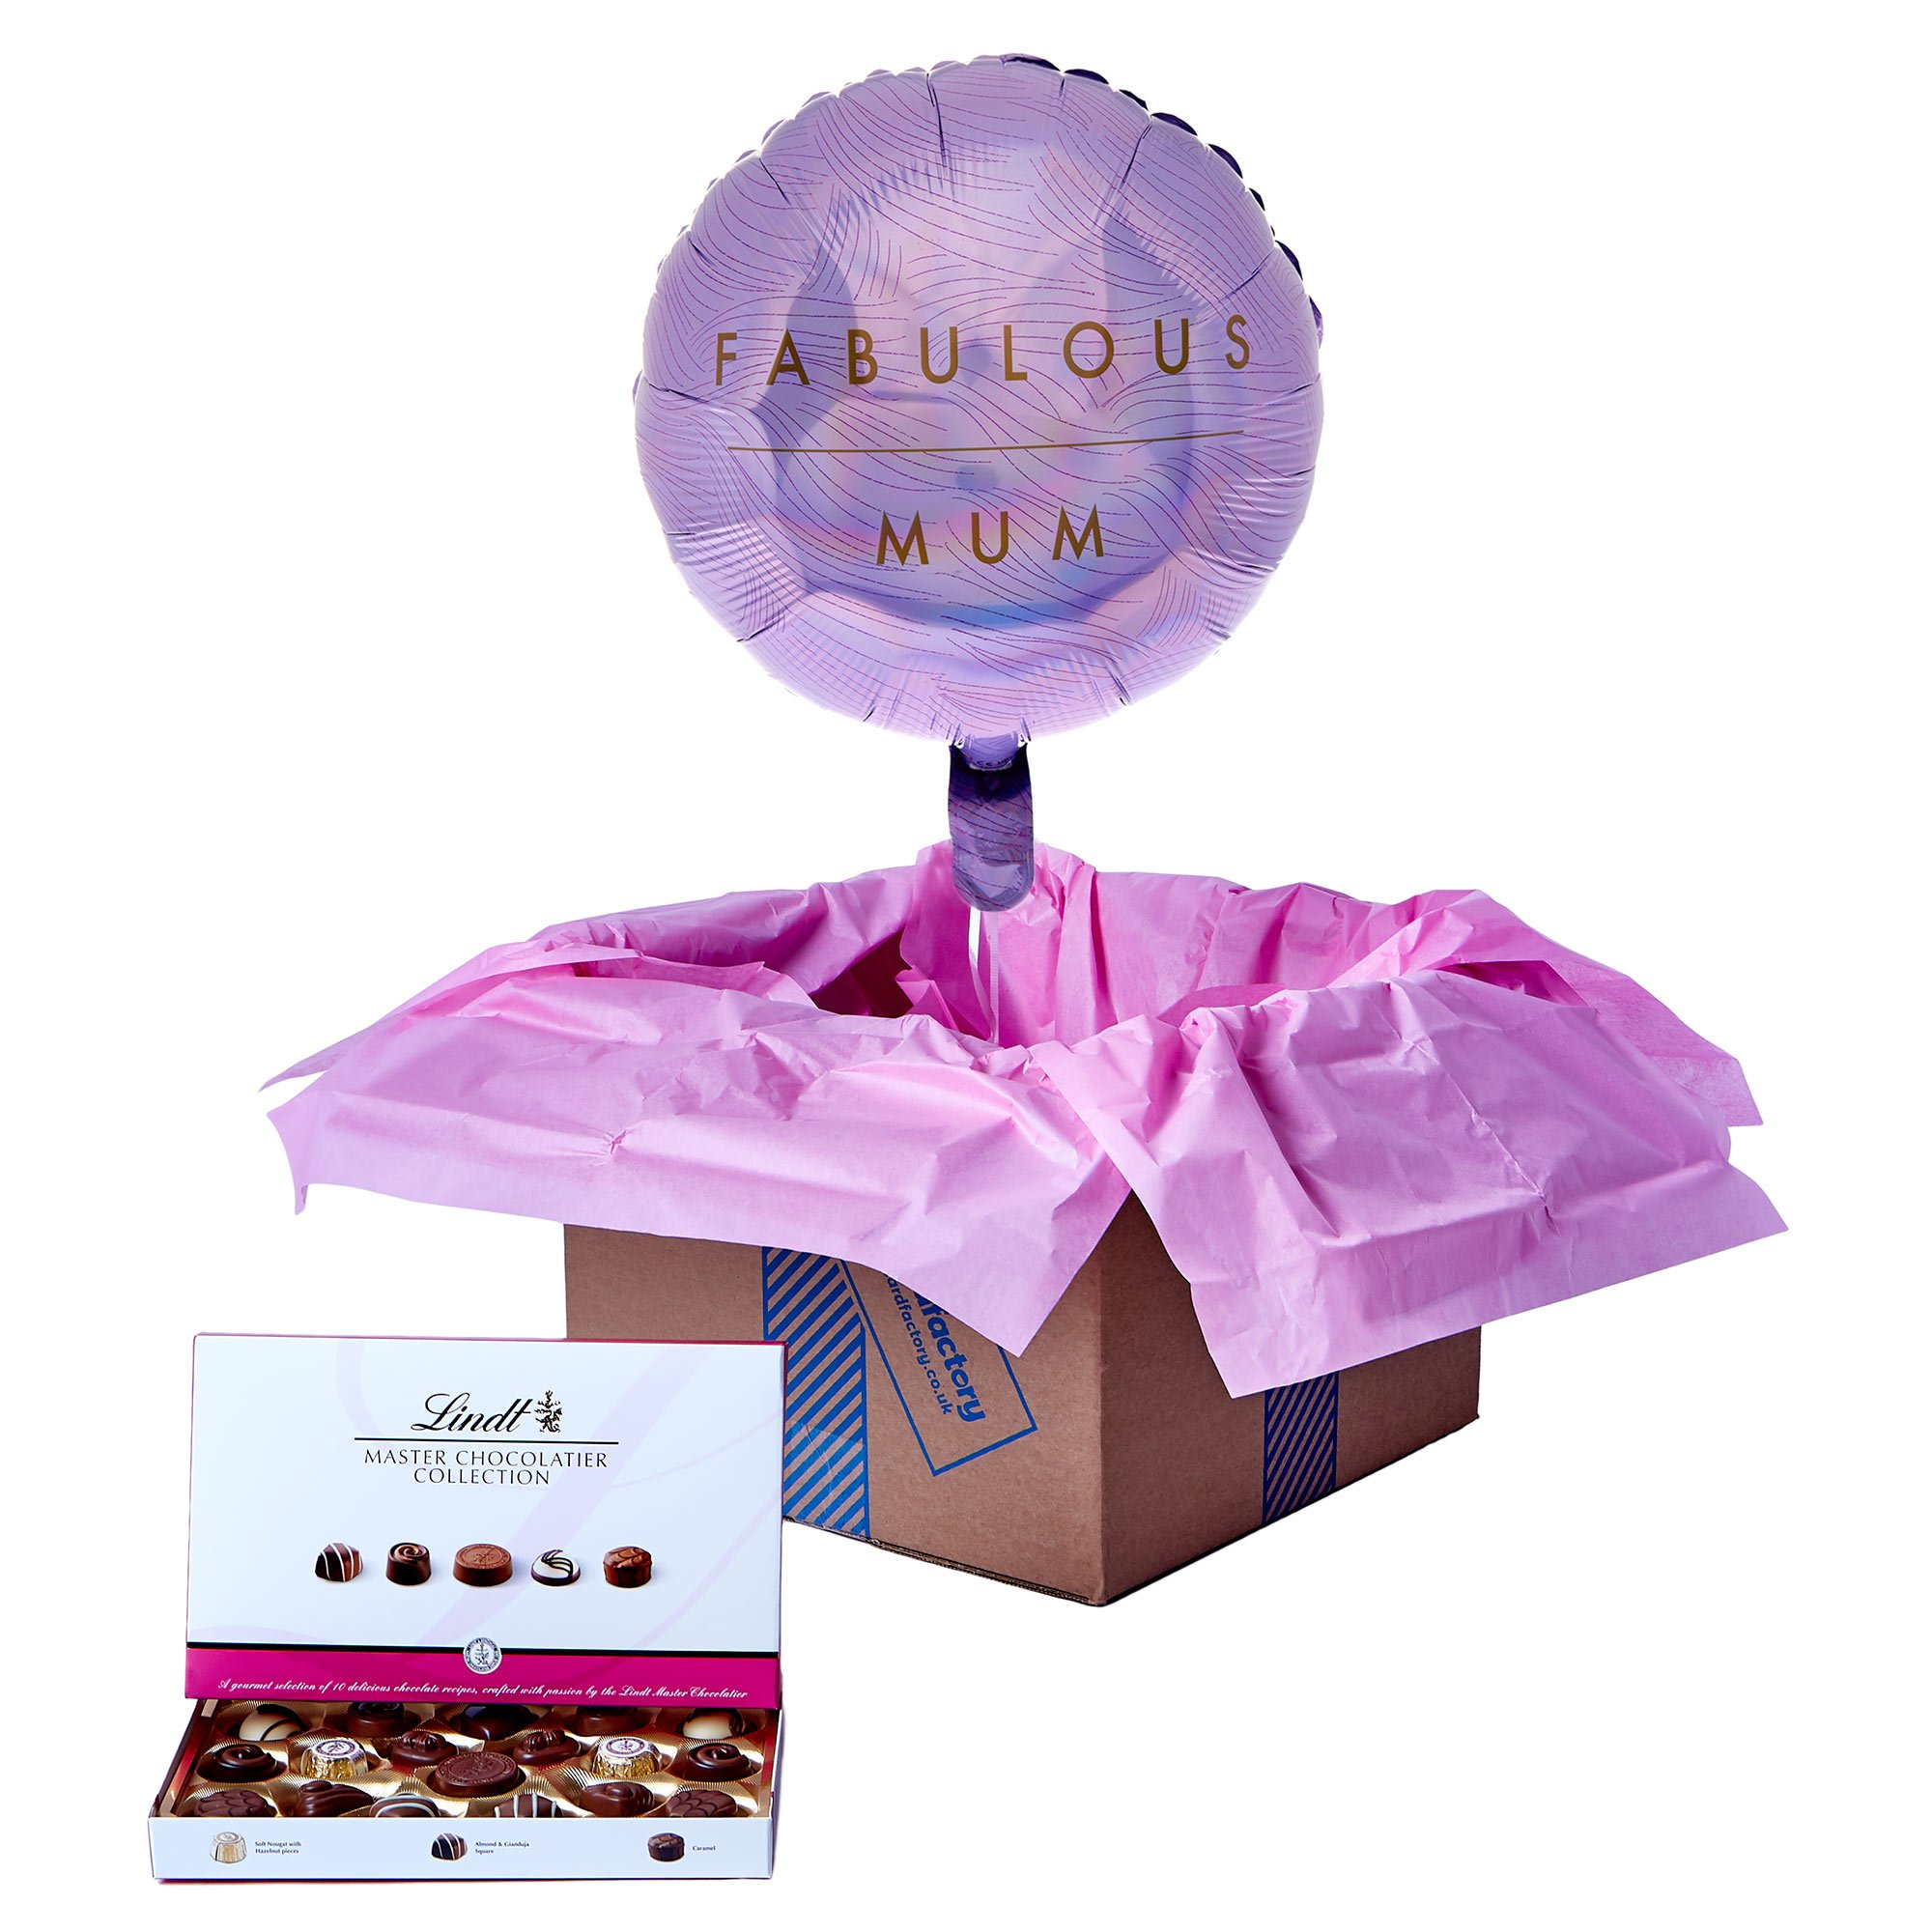 Fabulous Mum Balloon & Lindt Chocolates - Pre-Order For Mother's Day!